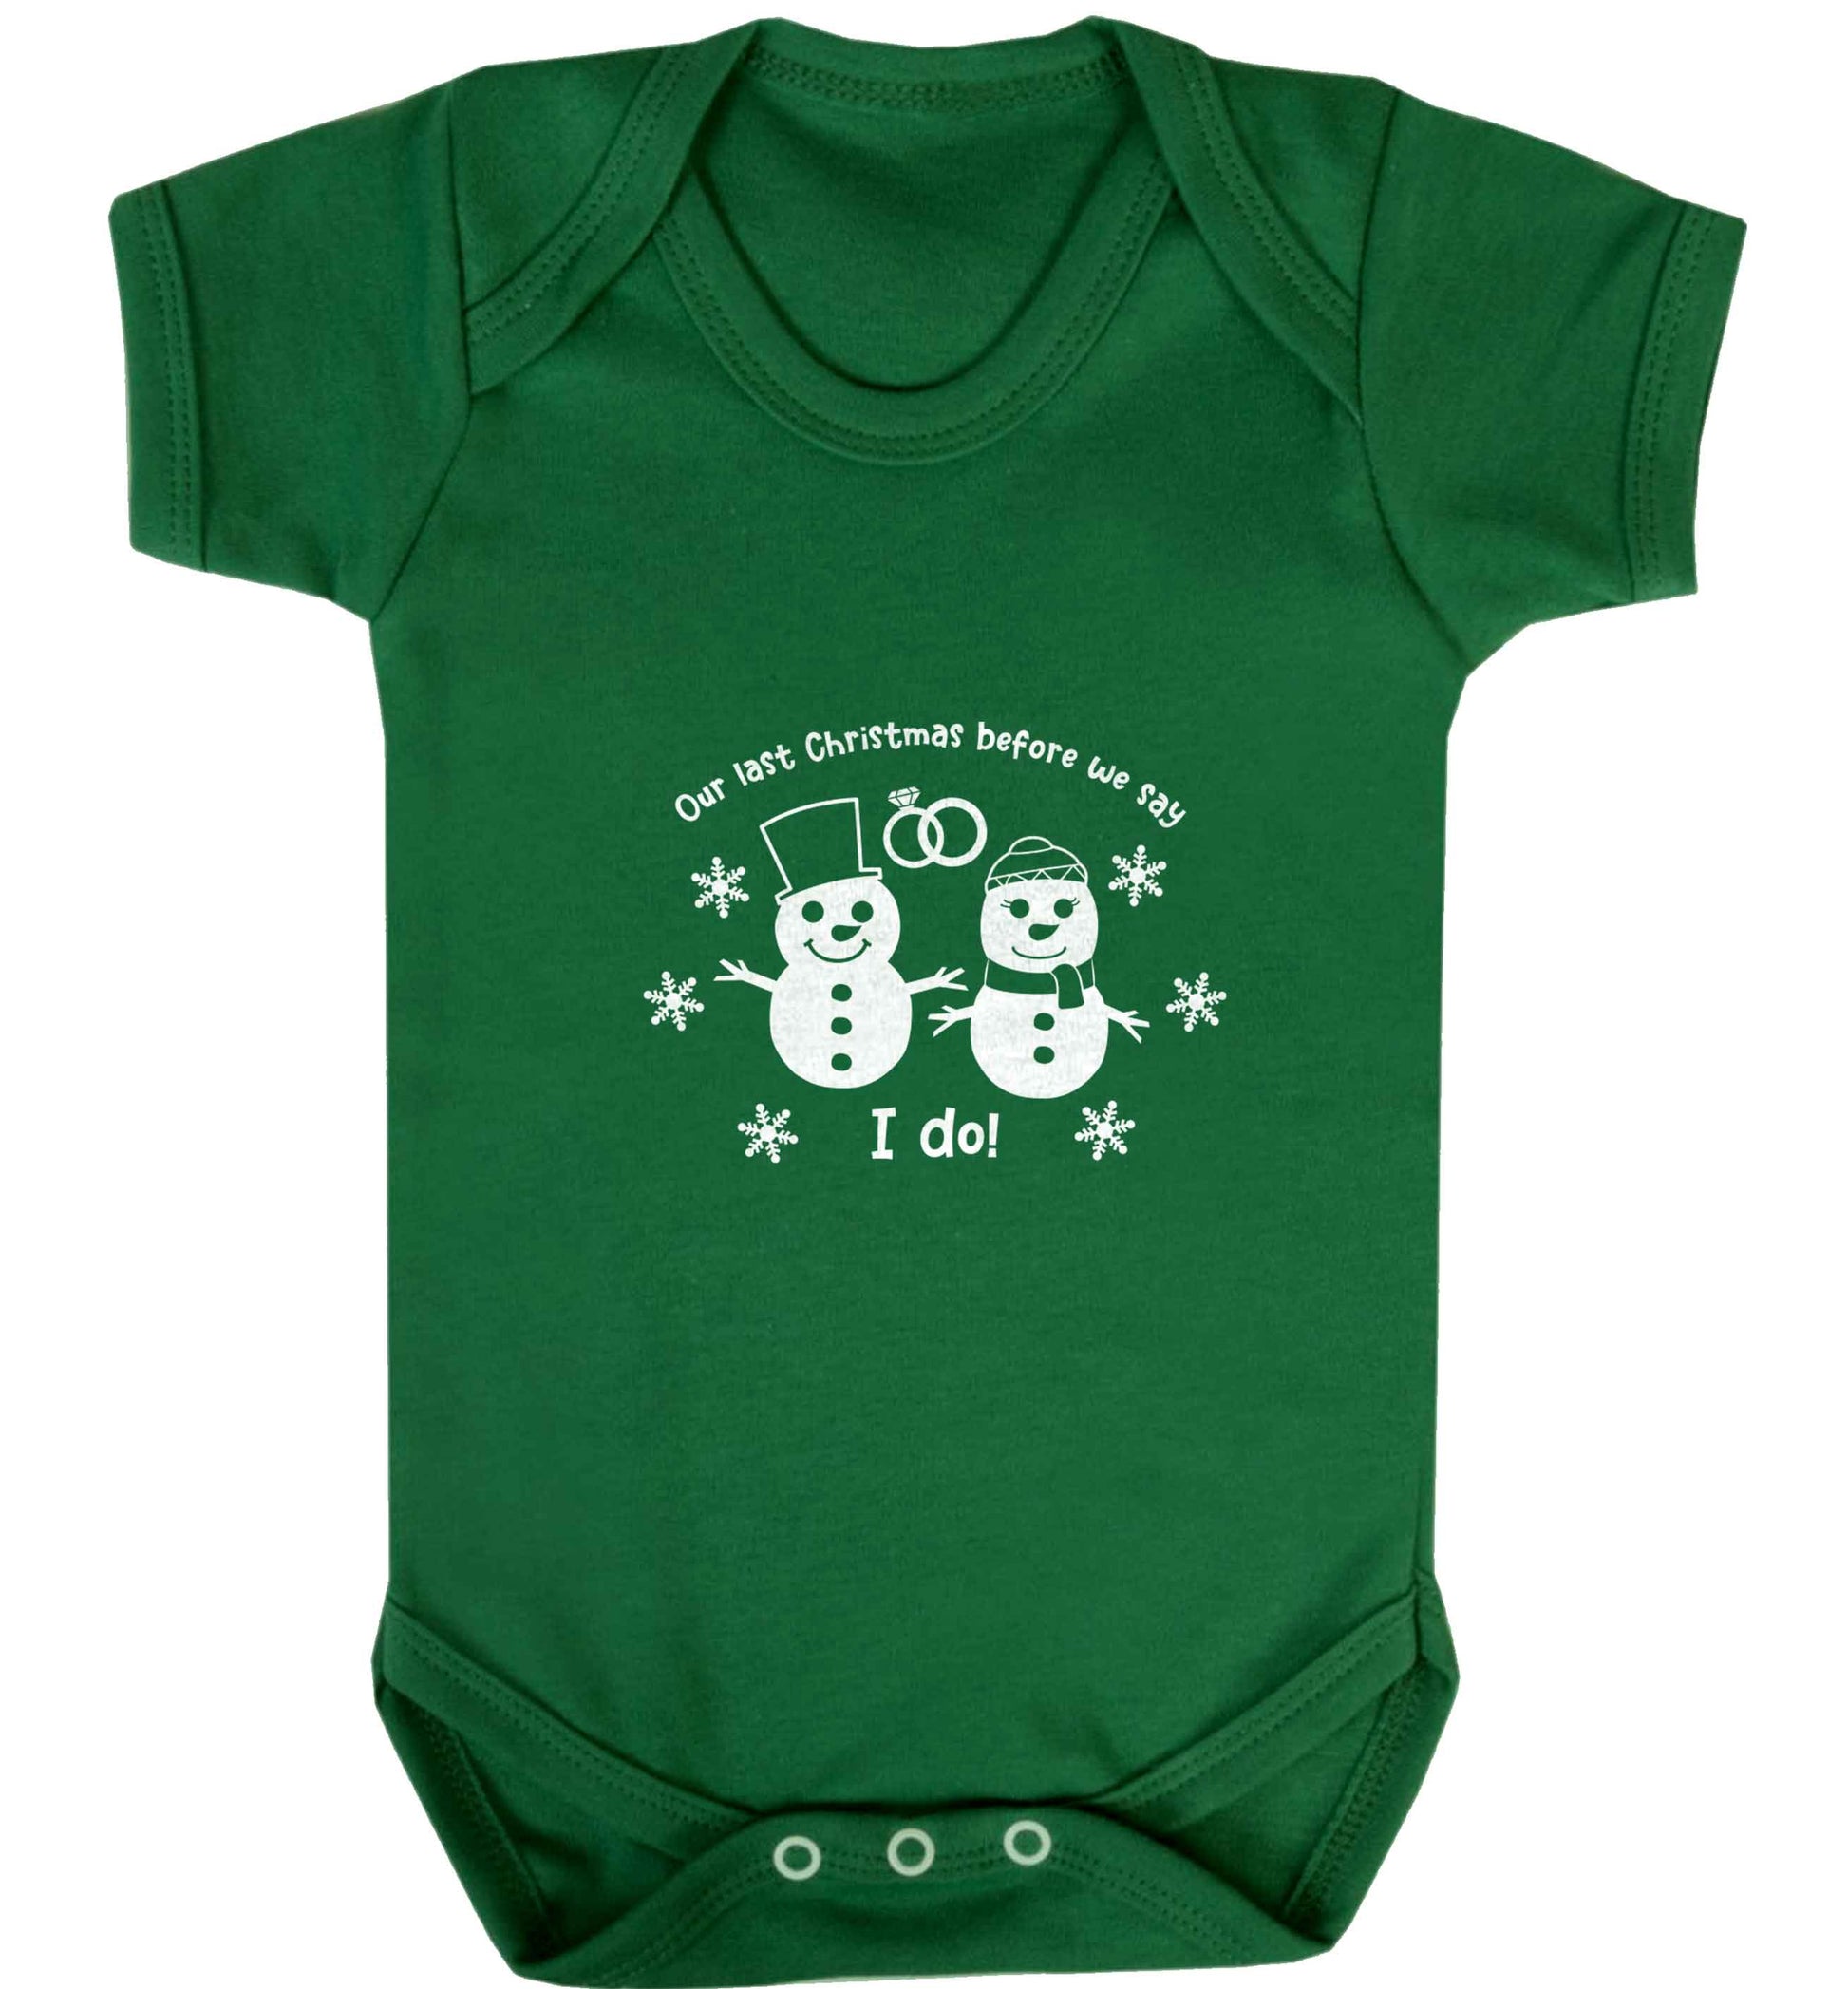 Last Christmas before we say I do baby vest green 18-24 months